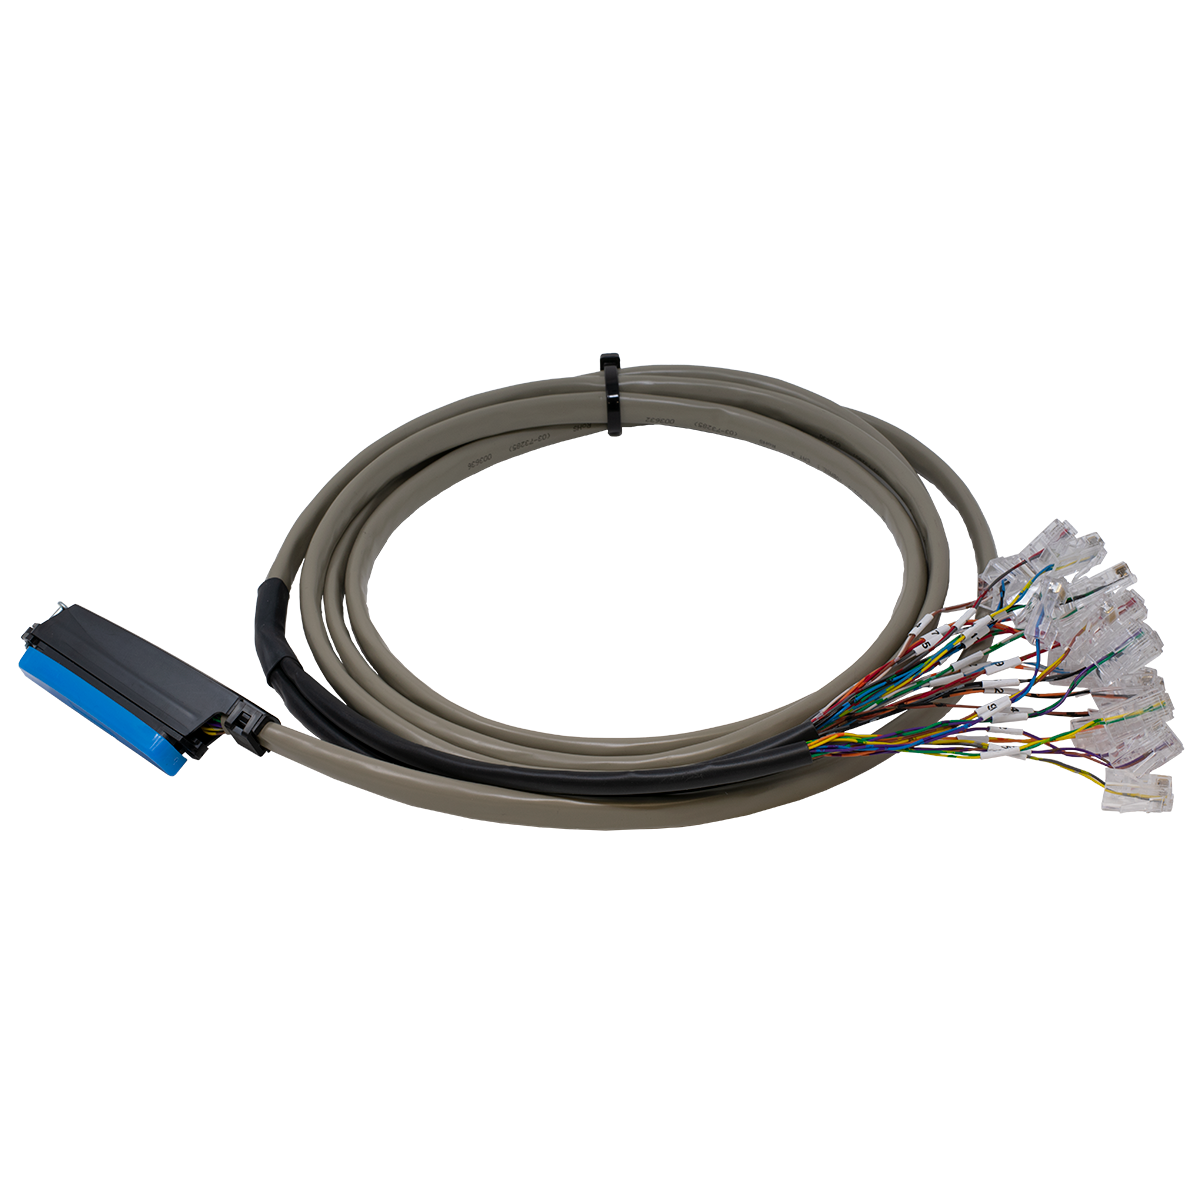 QWIK 10' Avaya IP Office / Samsung Officeserv Cable with Male Amp